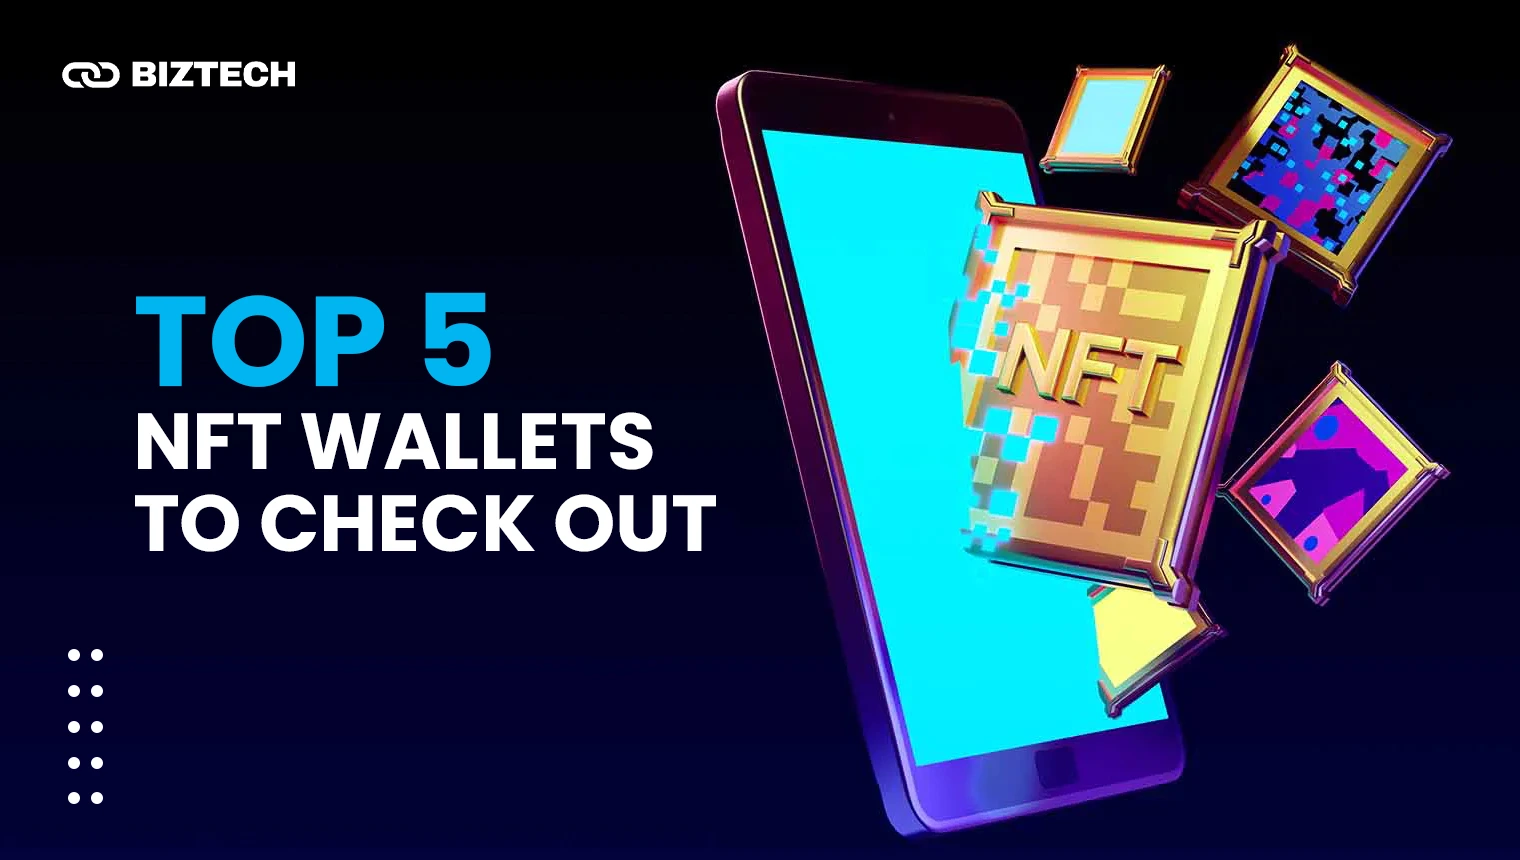 Top 5 NFT Wallets to Check Out